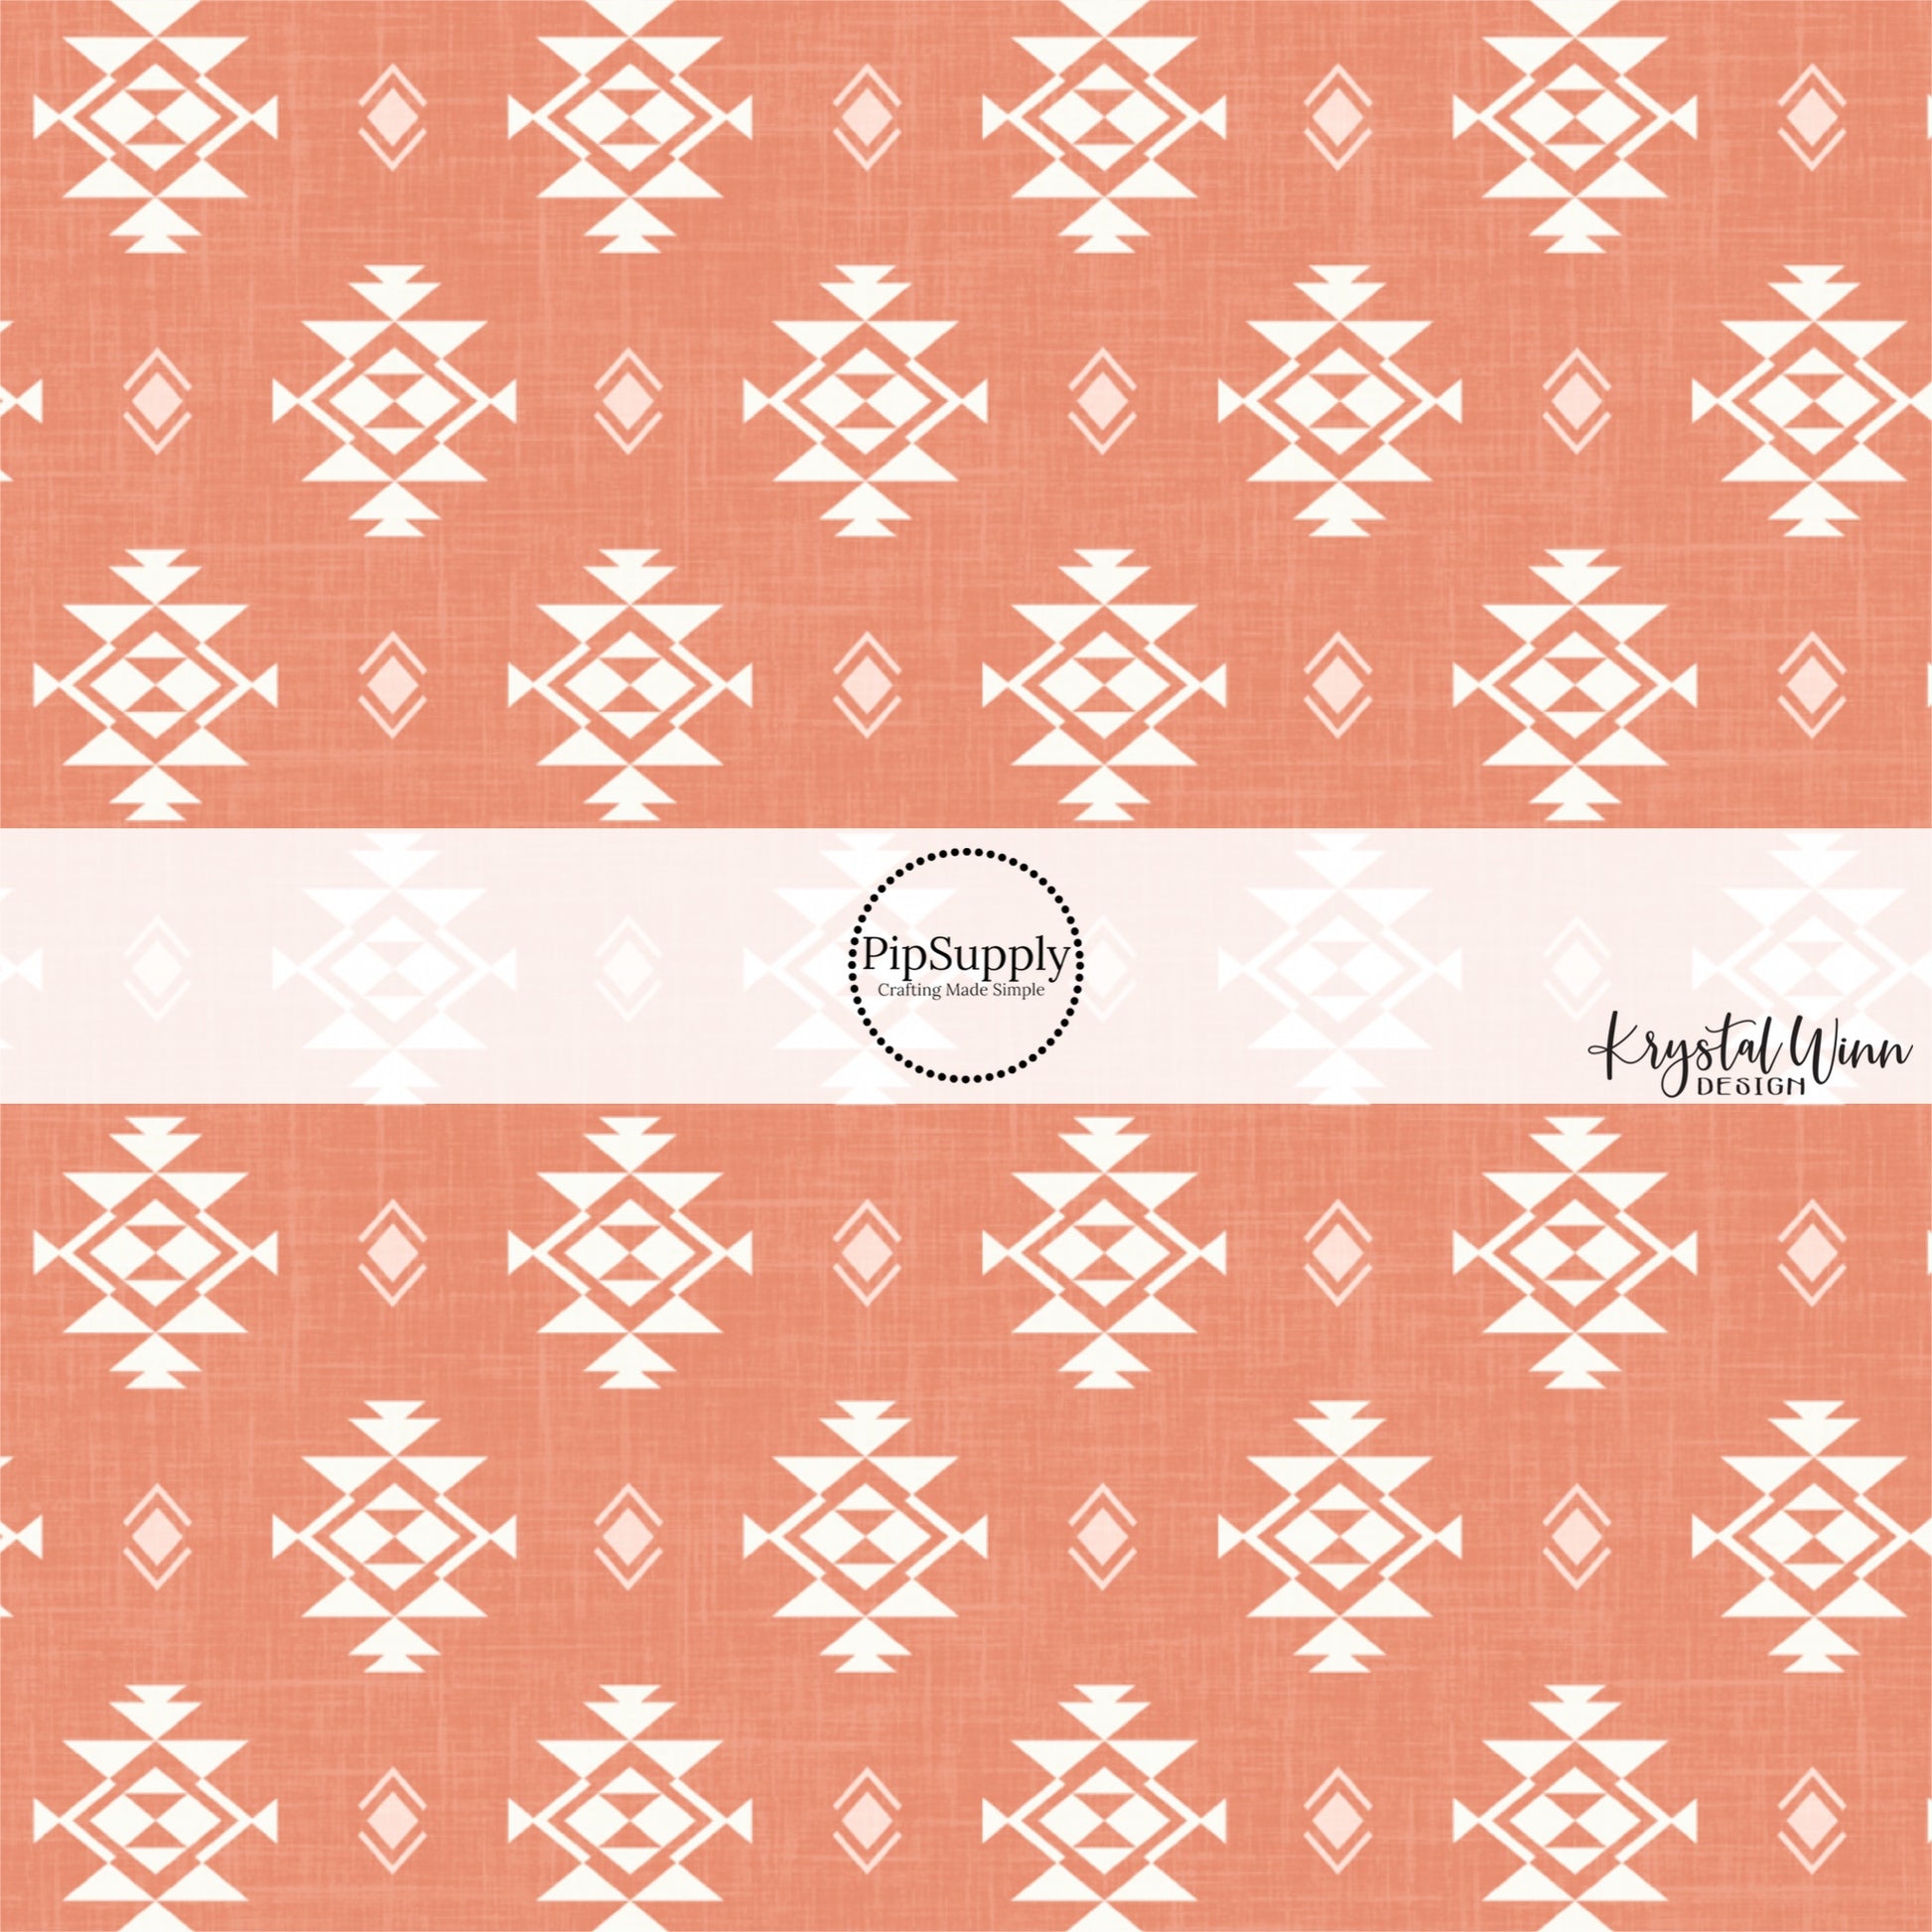 This summer fabric by the yard features western aztec pattern on terracotta. This fun summer themed fabric can be used for all your sewing and crafting needs.